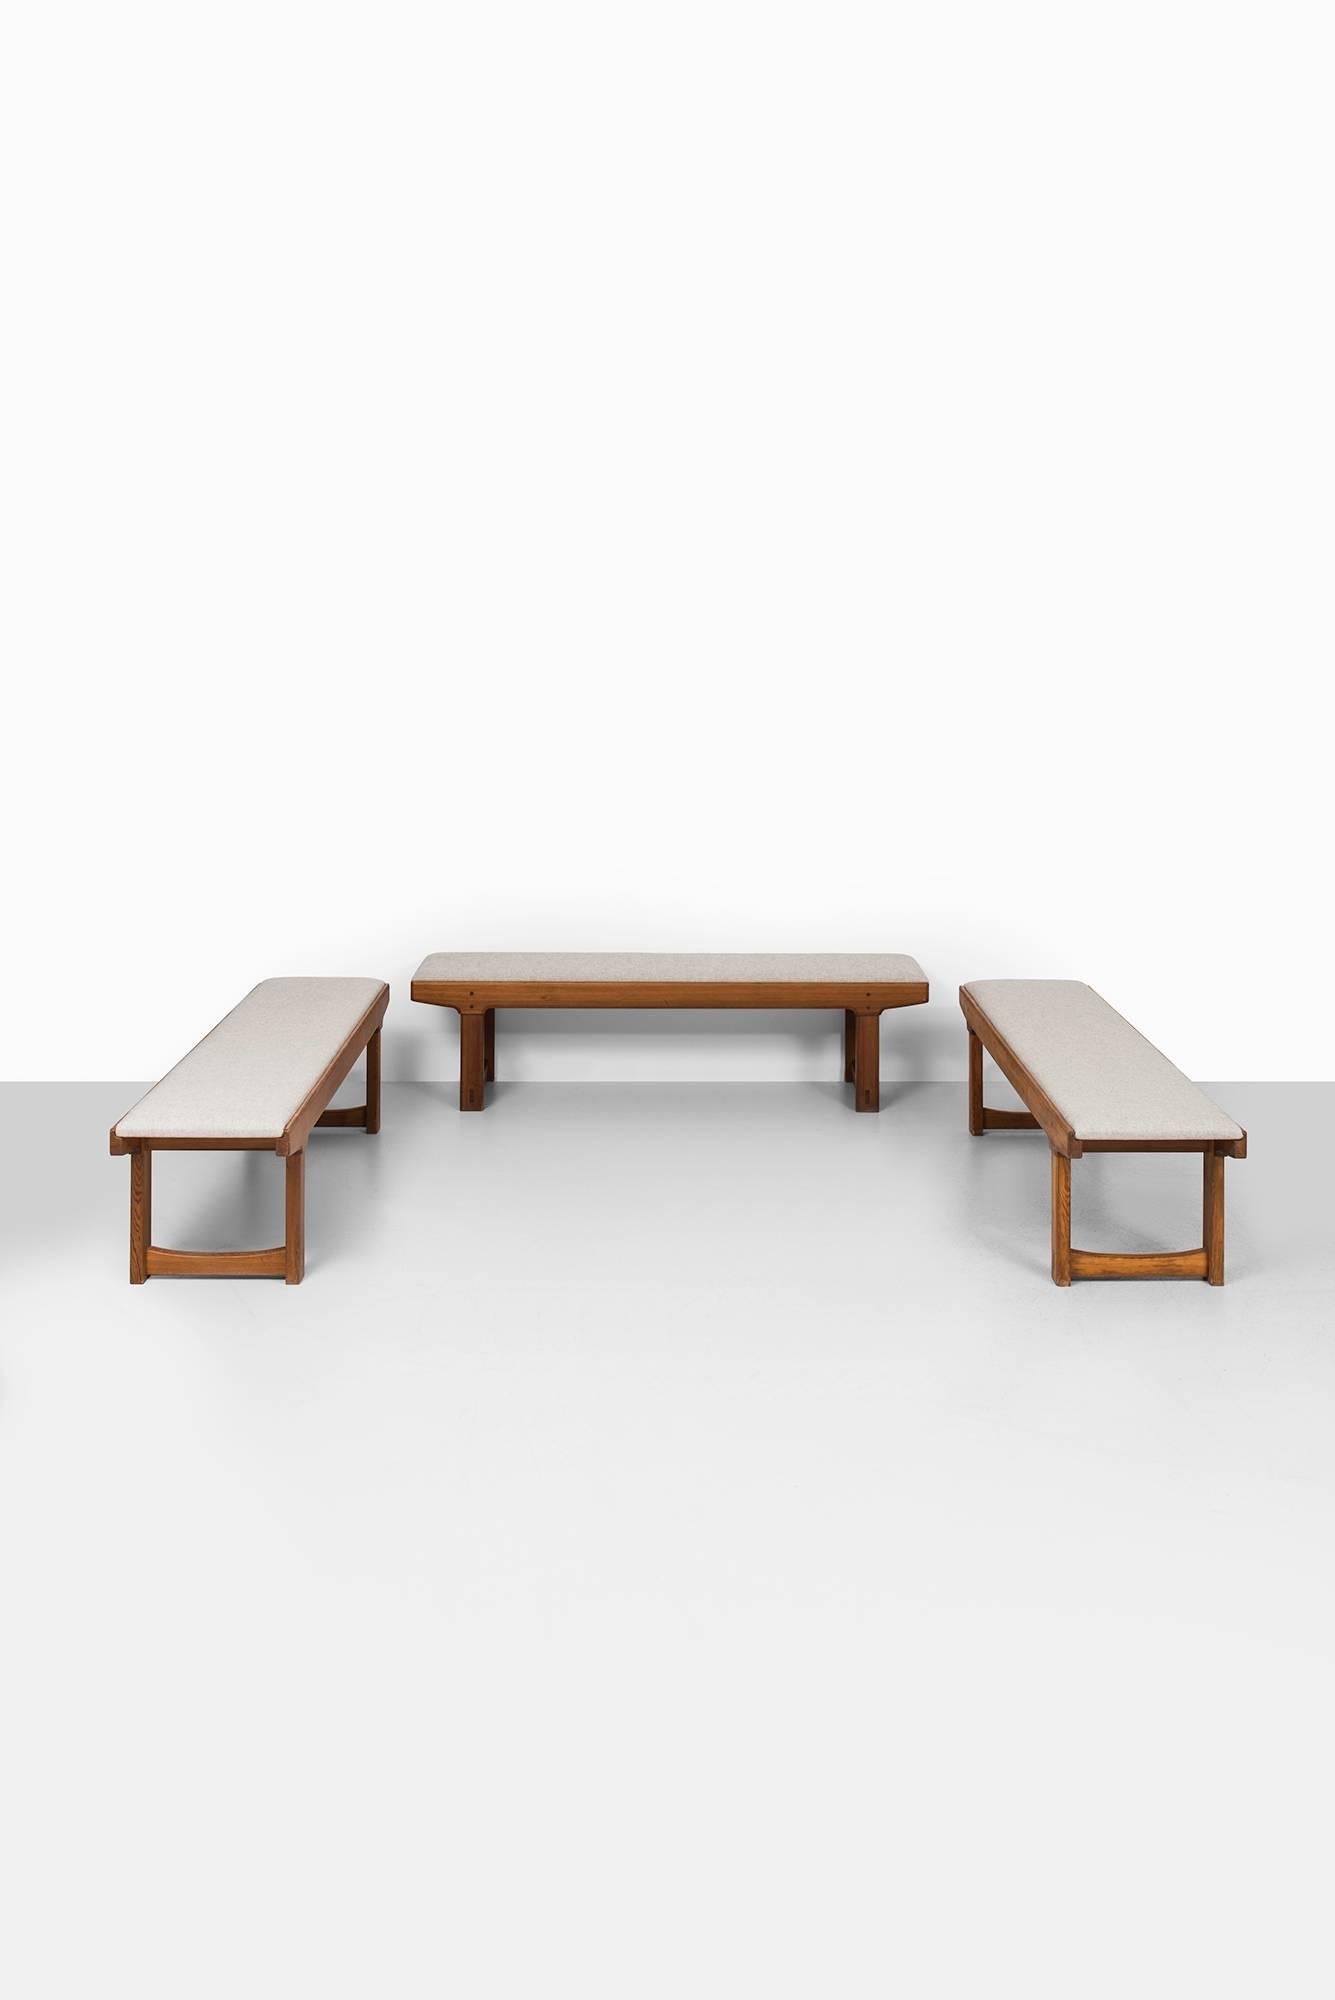 Bench in Oregon Pine in the Manner of Carl Malmsten 3